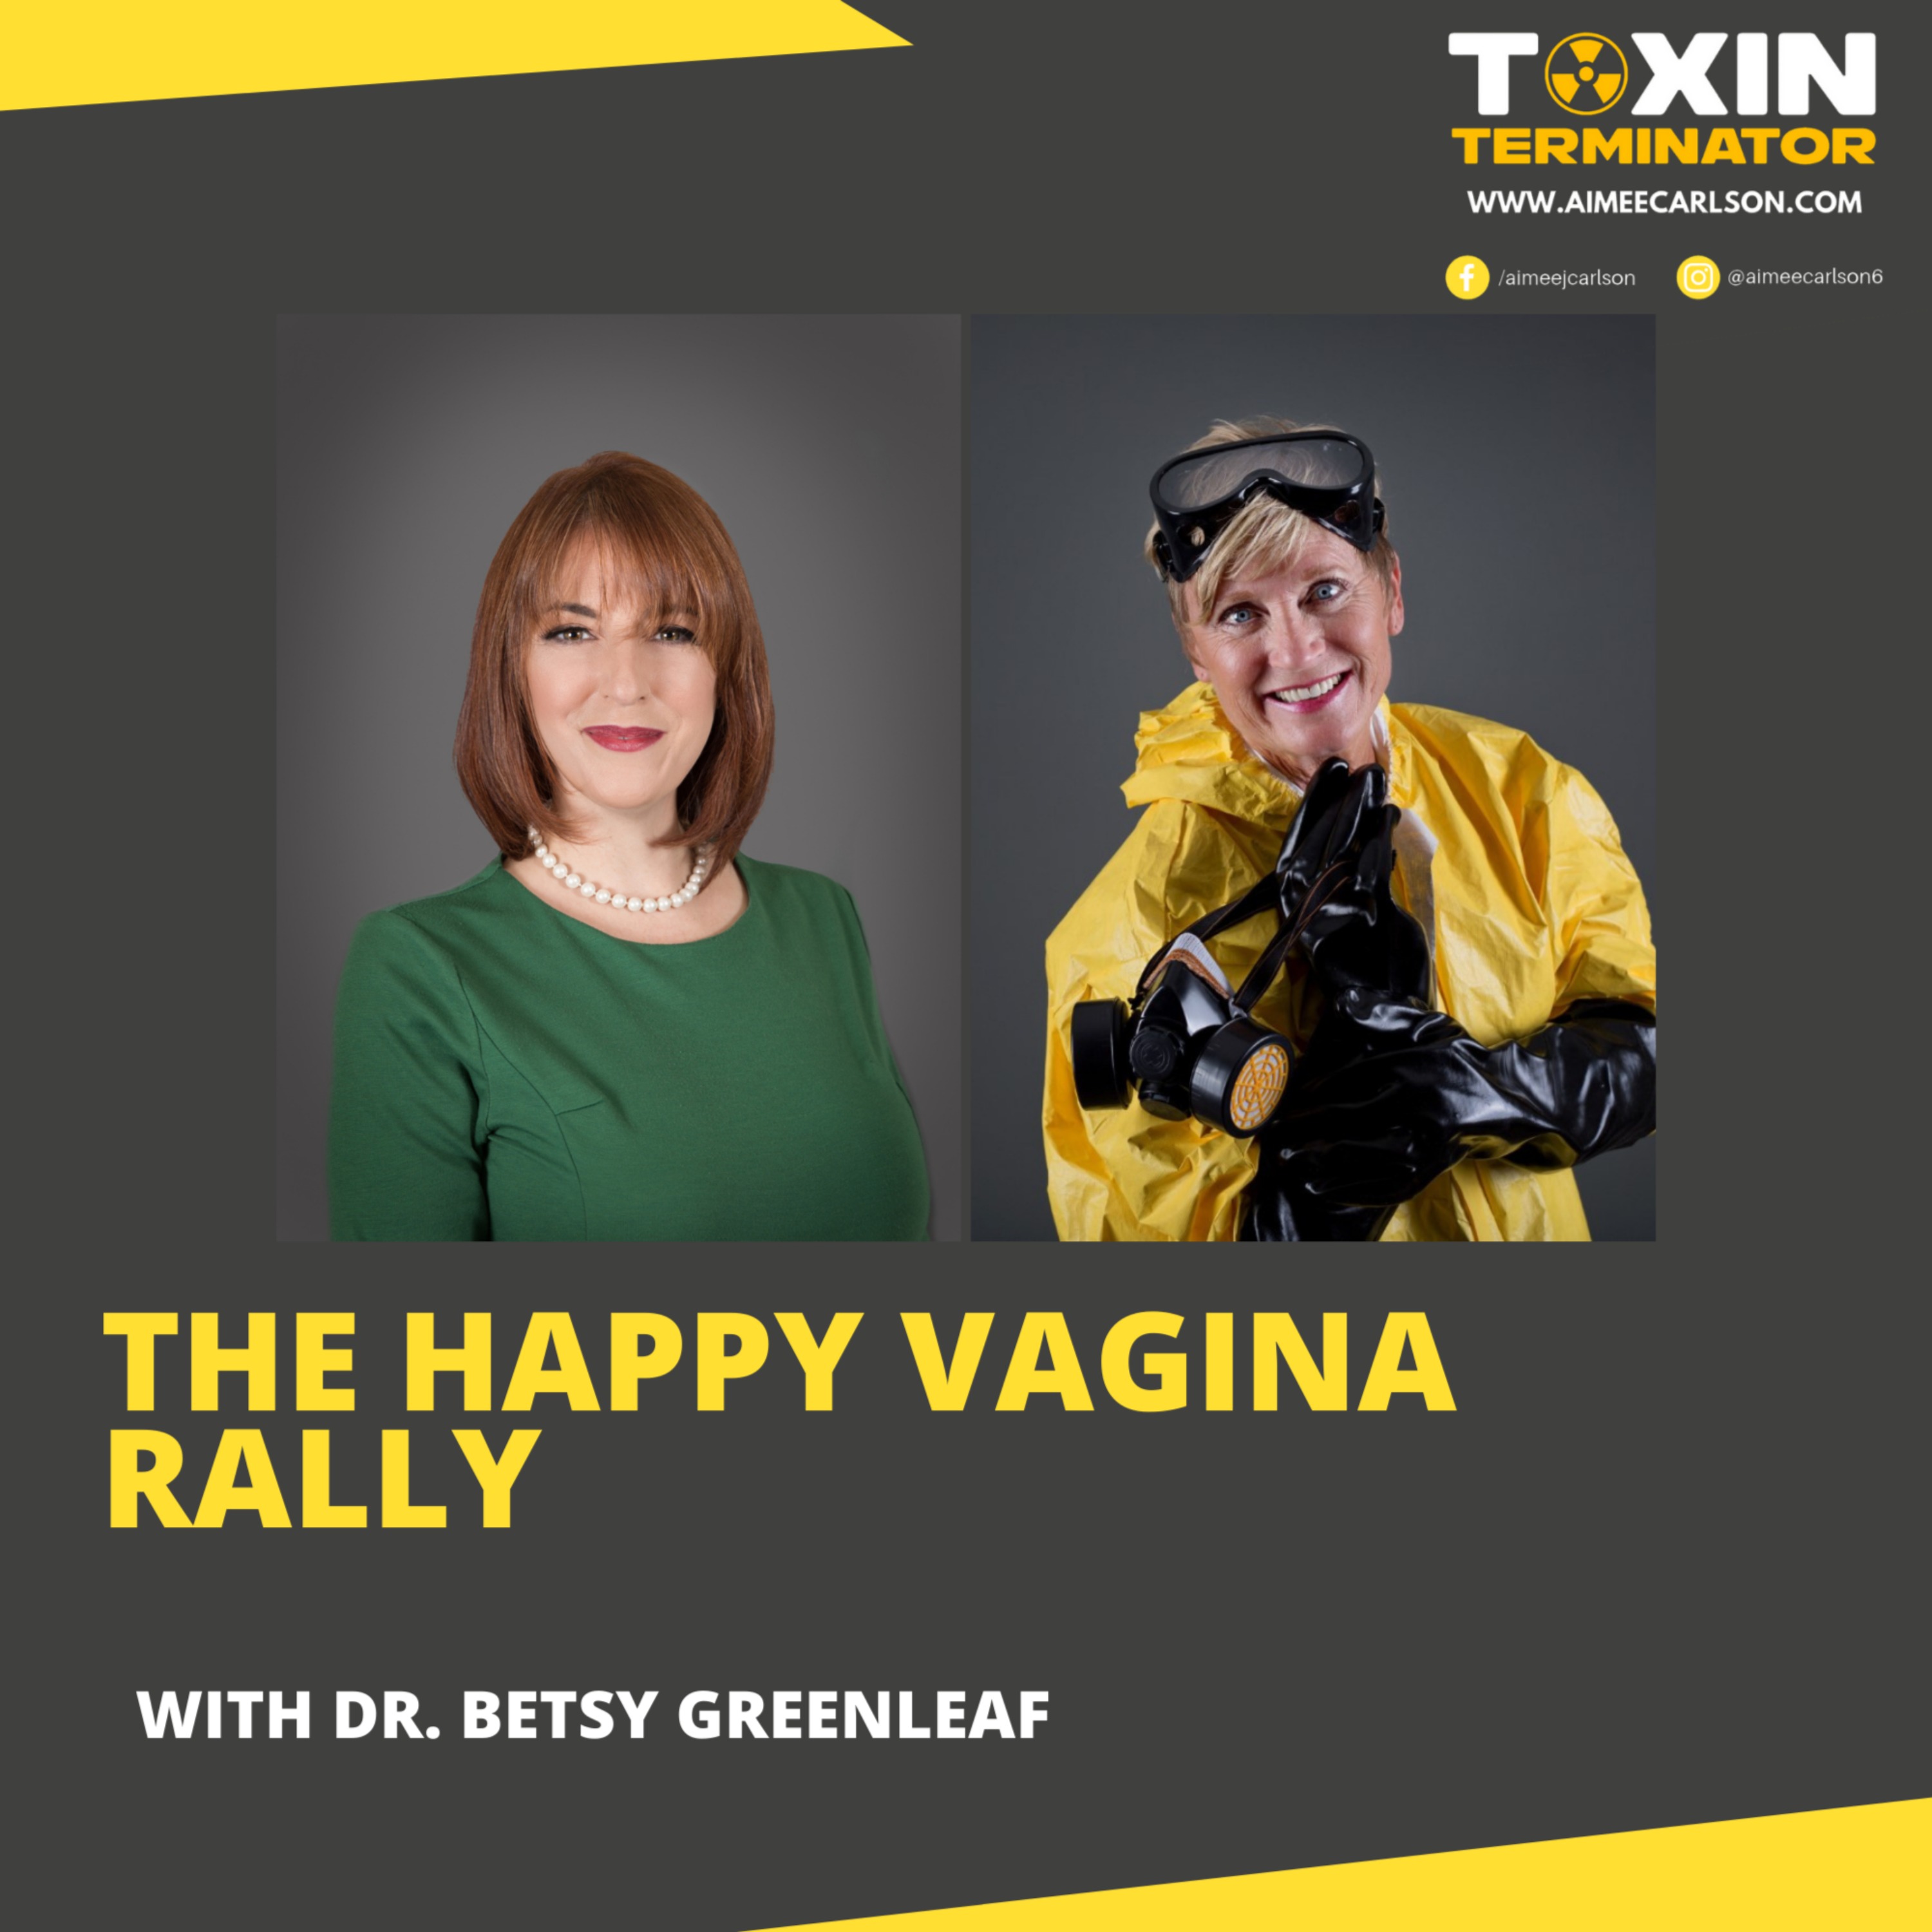 The Happy Vagina Rally with Dr. Betsy Greenleaf